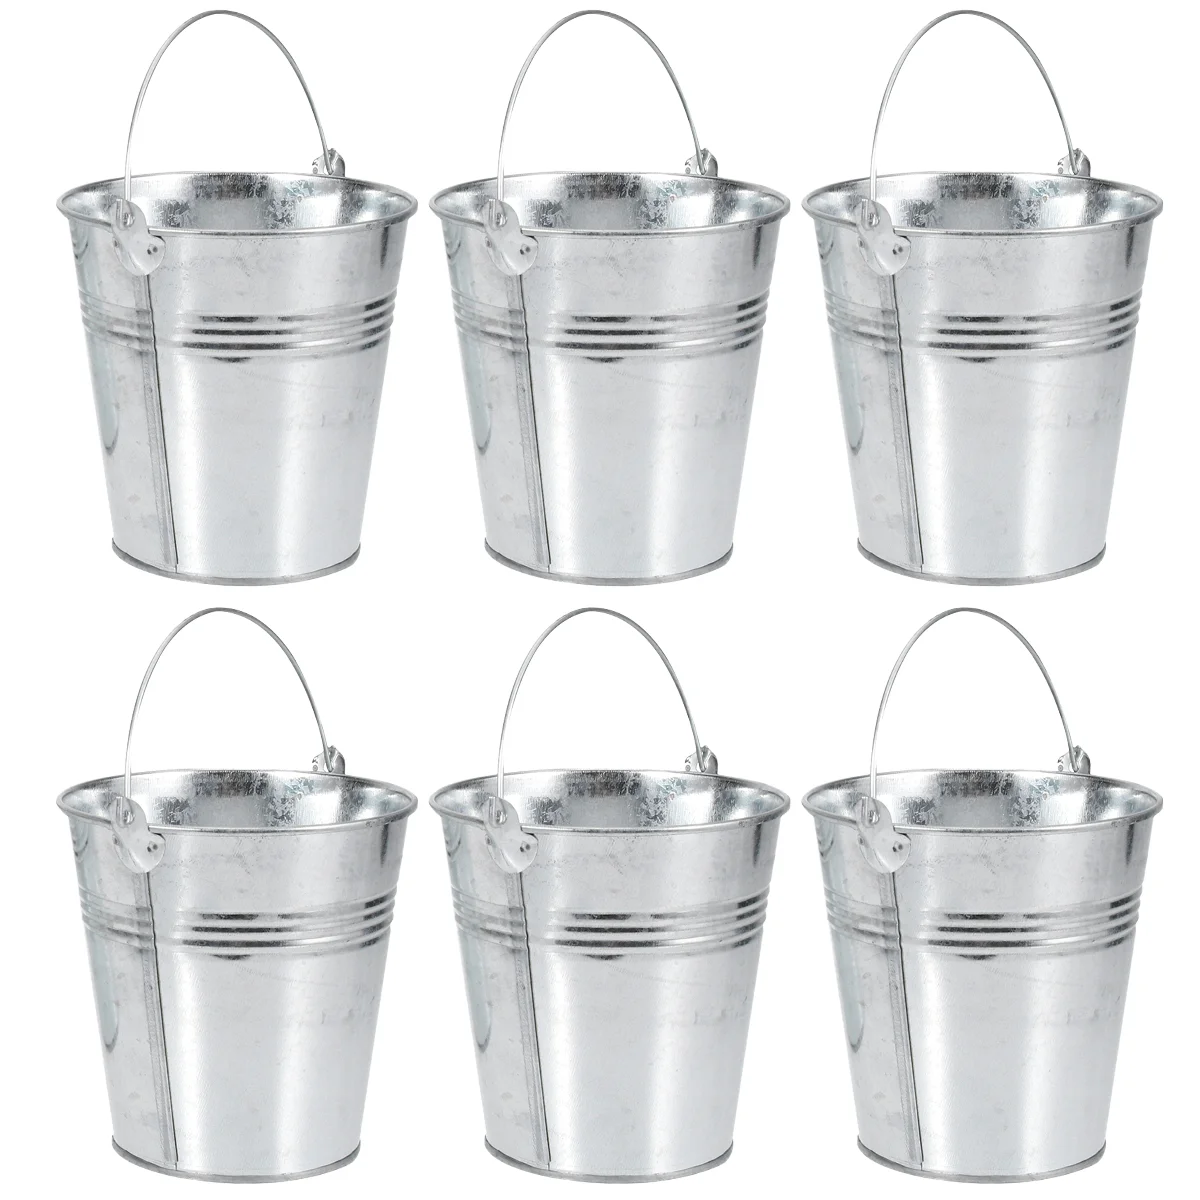 

Bucket Metal Buckets Mini Tin Pails French Ice Tinplate Fries Pail Serving Party Galvanized Flower Chip Candy Container Snack